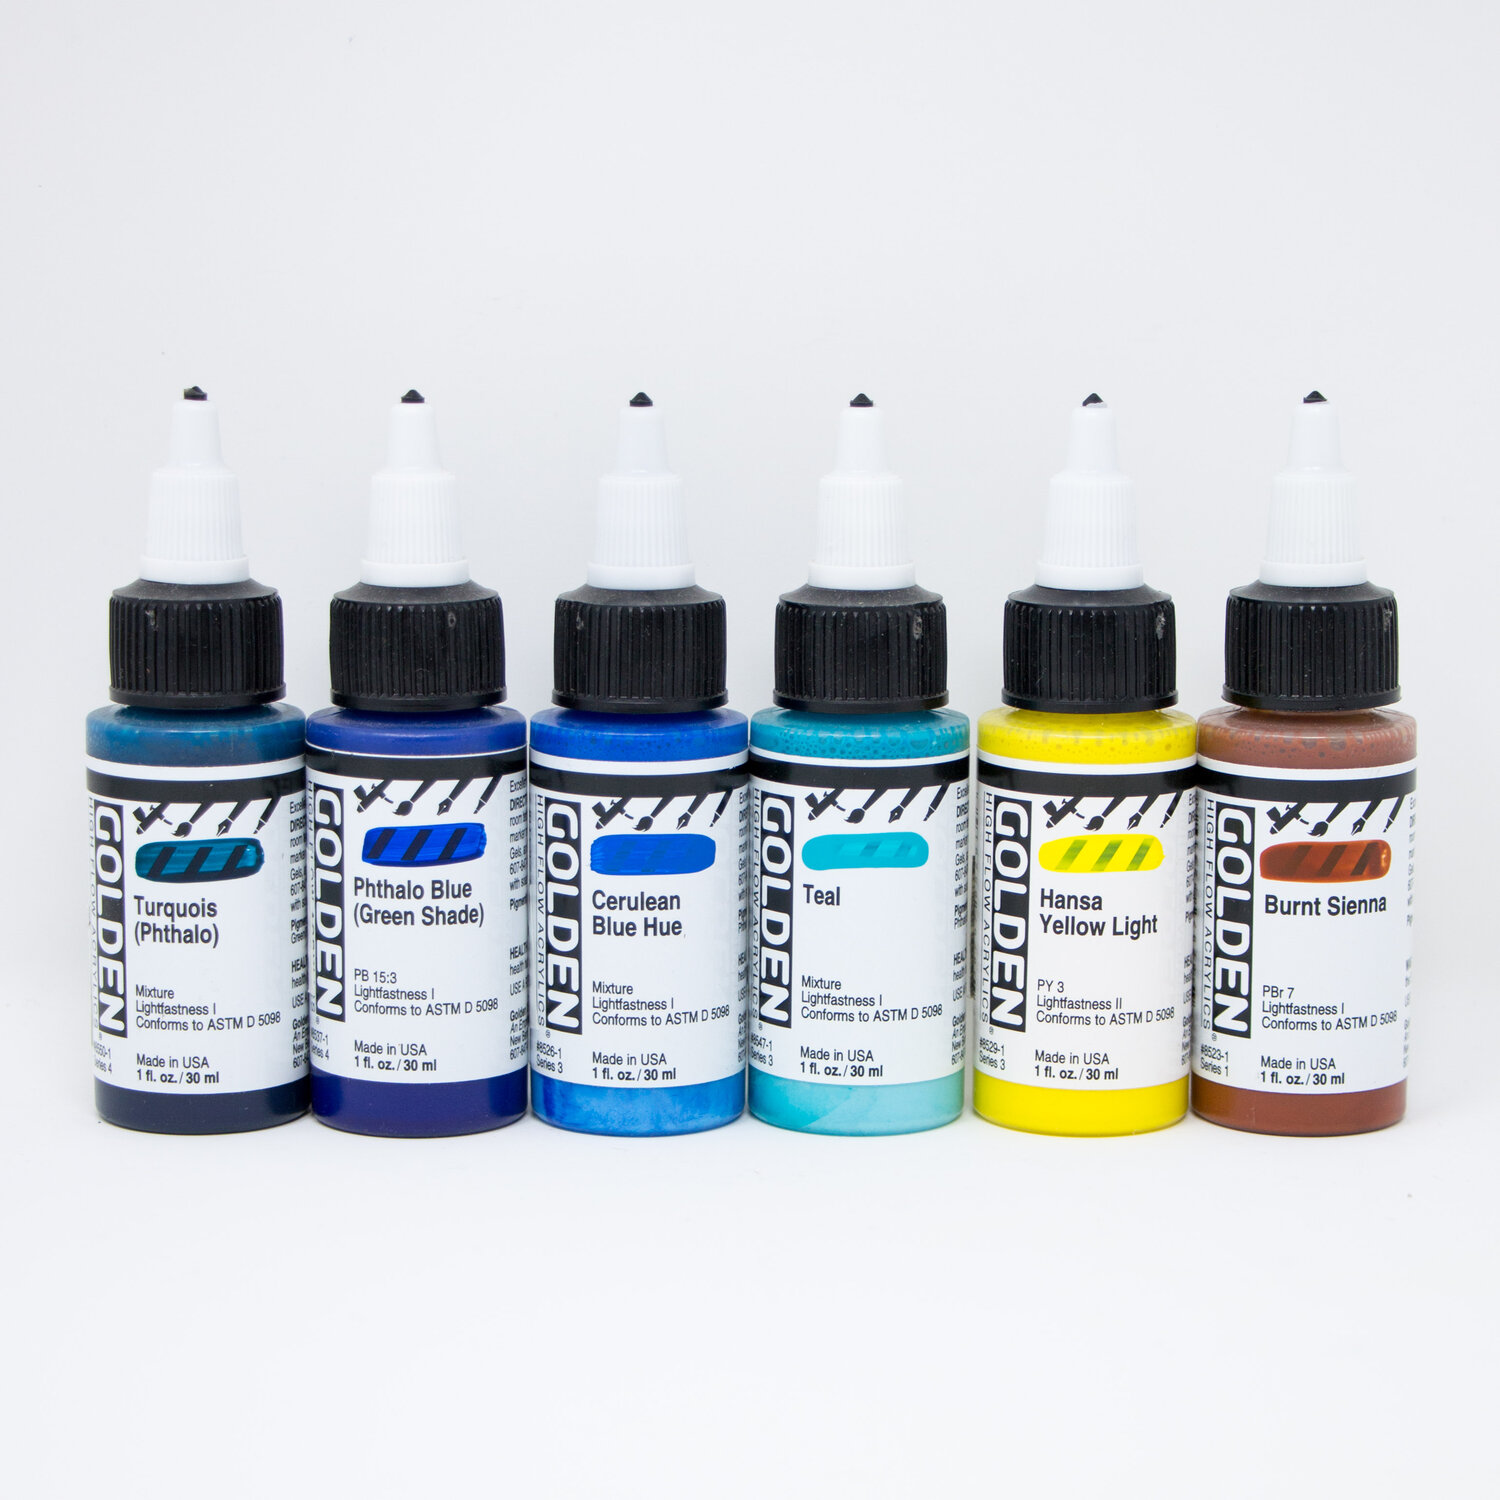 GOLDEN High Flow Colors — Midwest Airbrush Supply Co